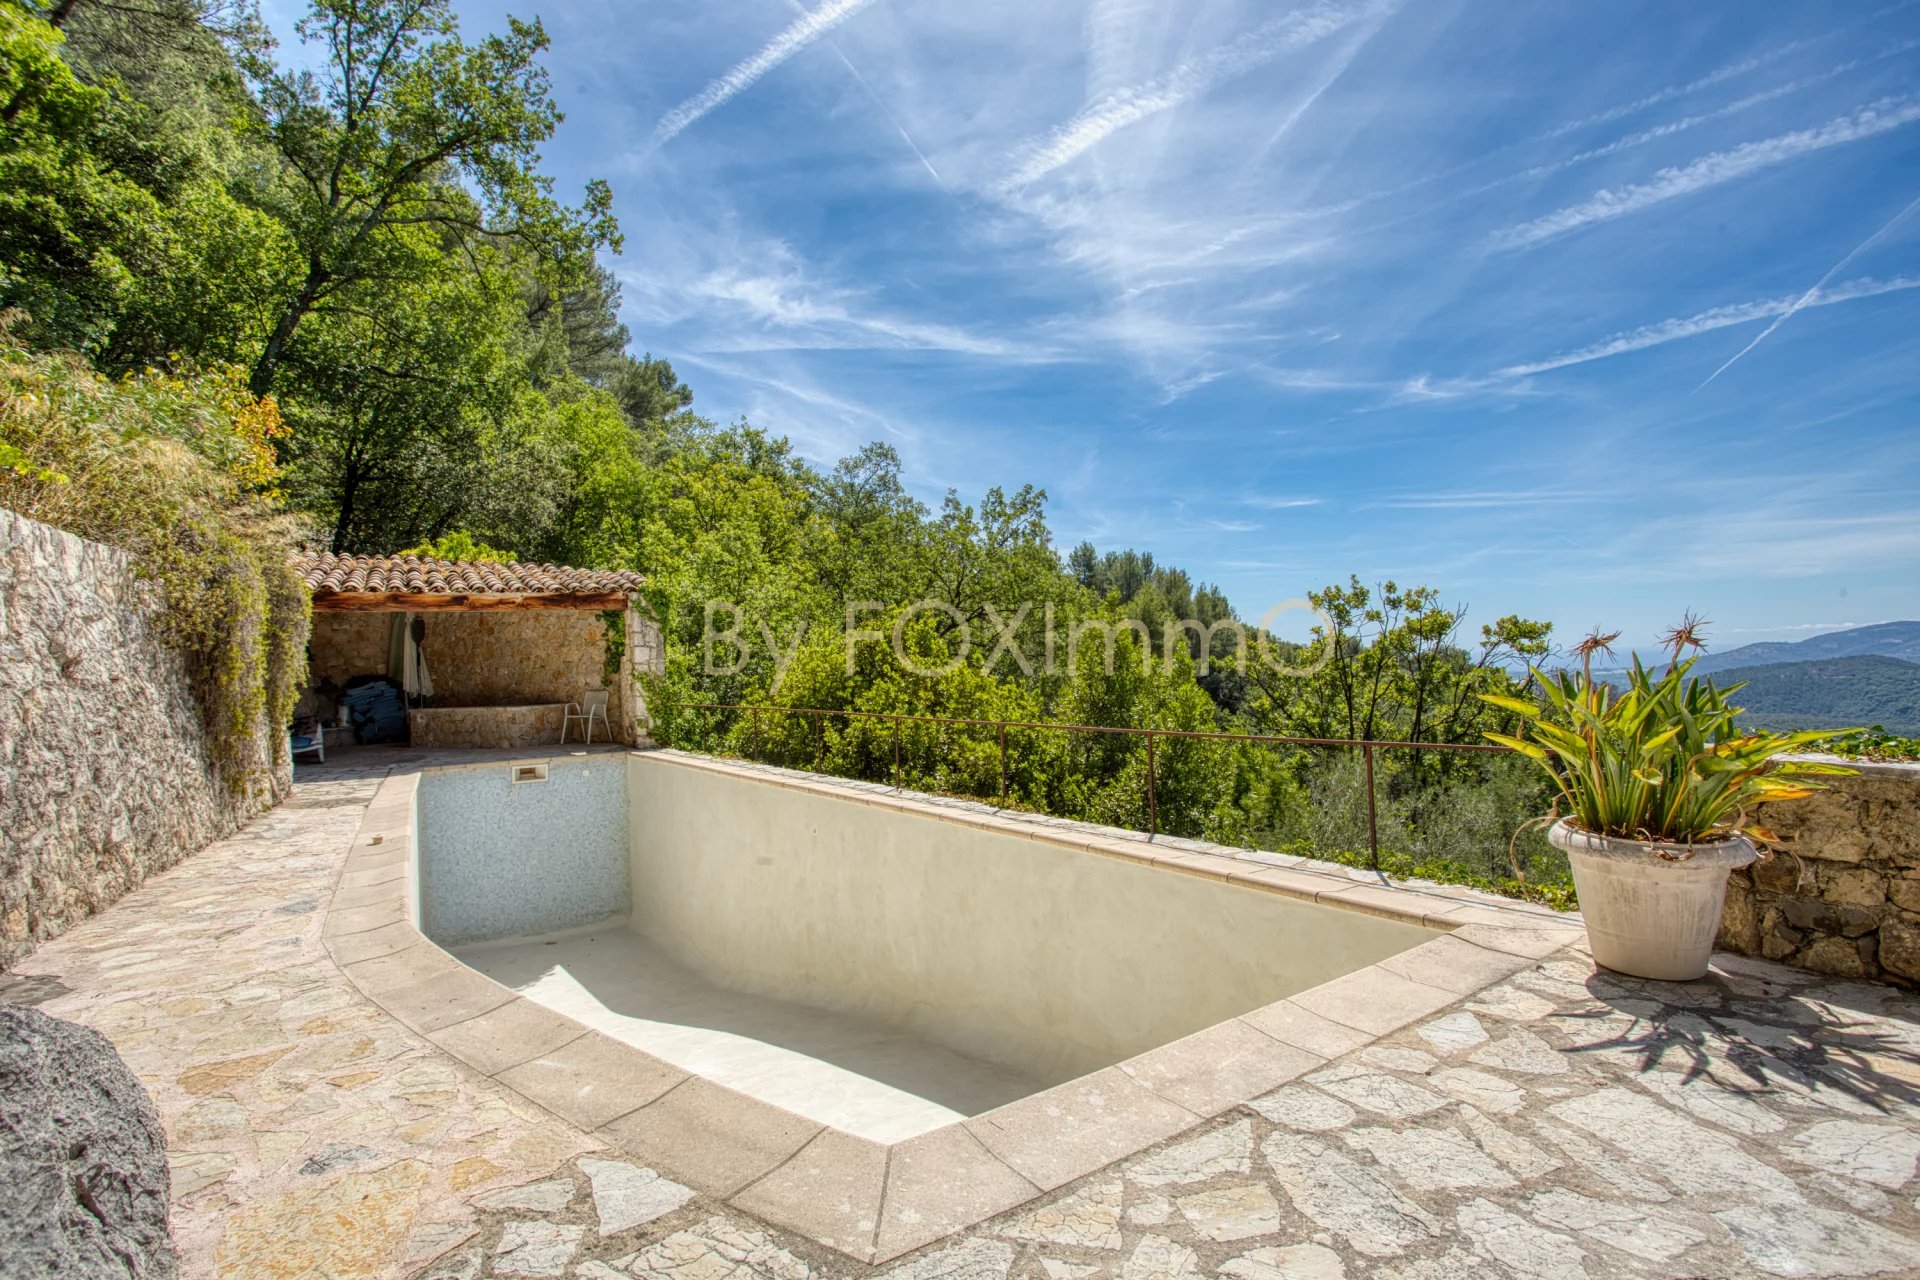 5-ROOM VILLA - PANORAMIC SEA VIEW - ABSOLUTE PEACE AND QUIET - CABRIS